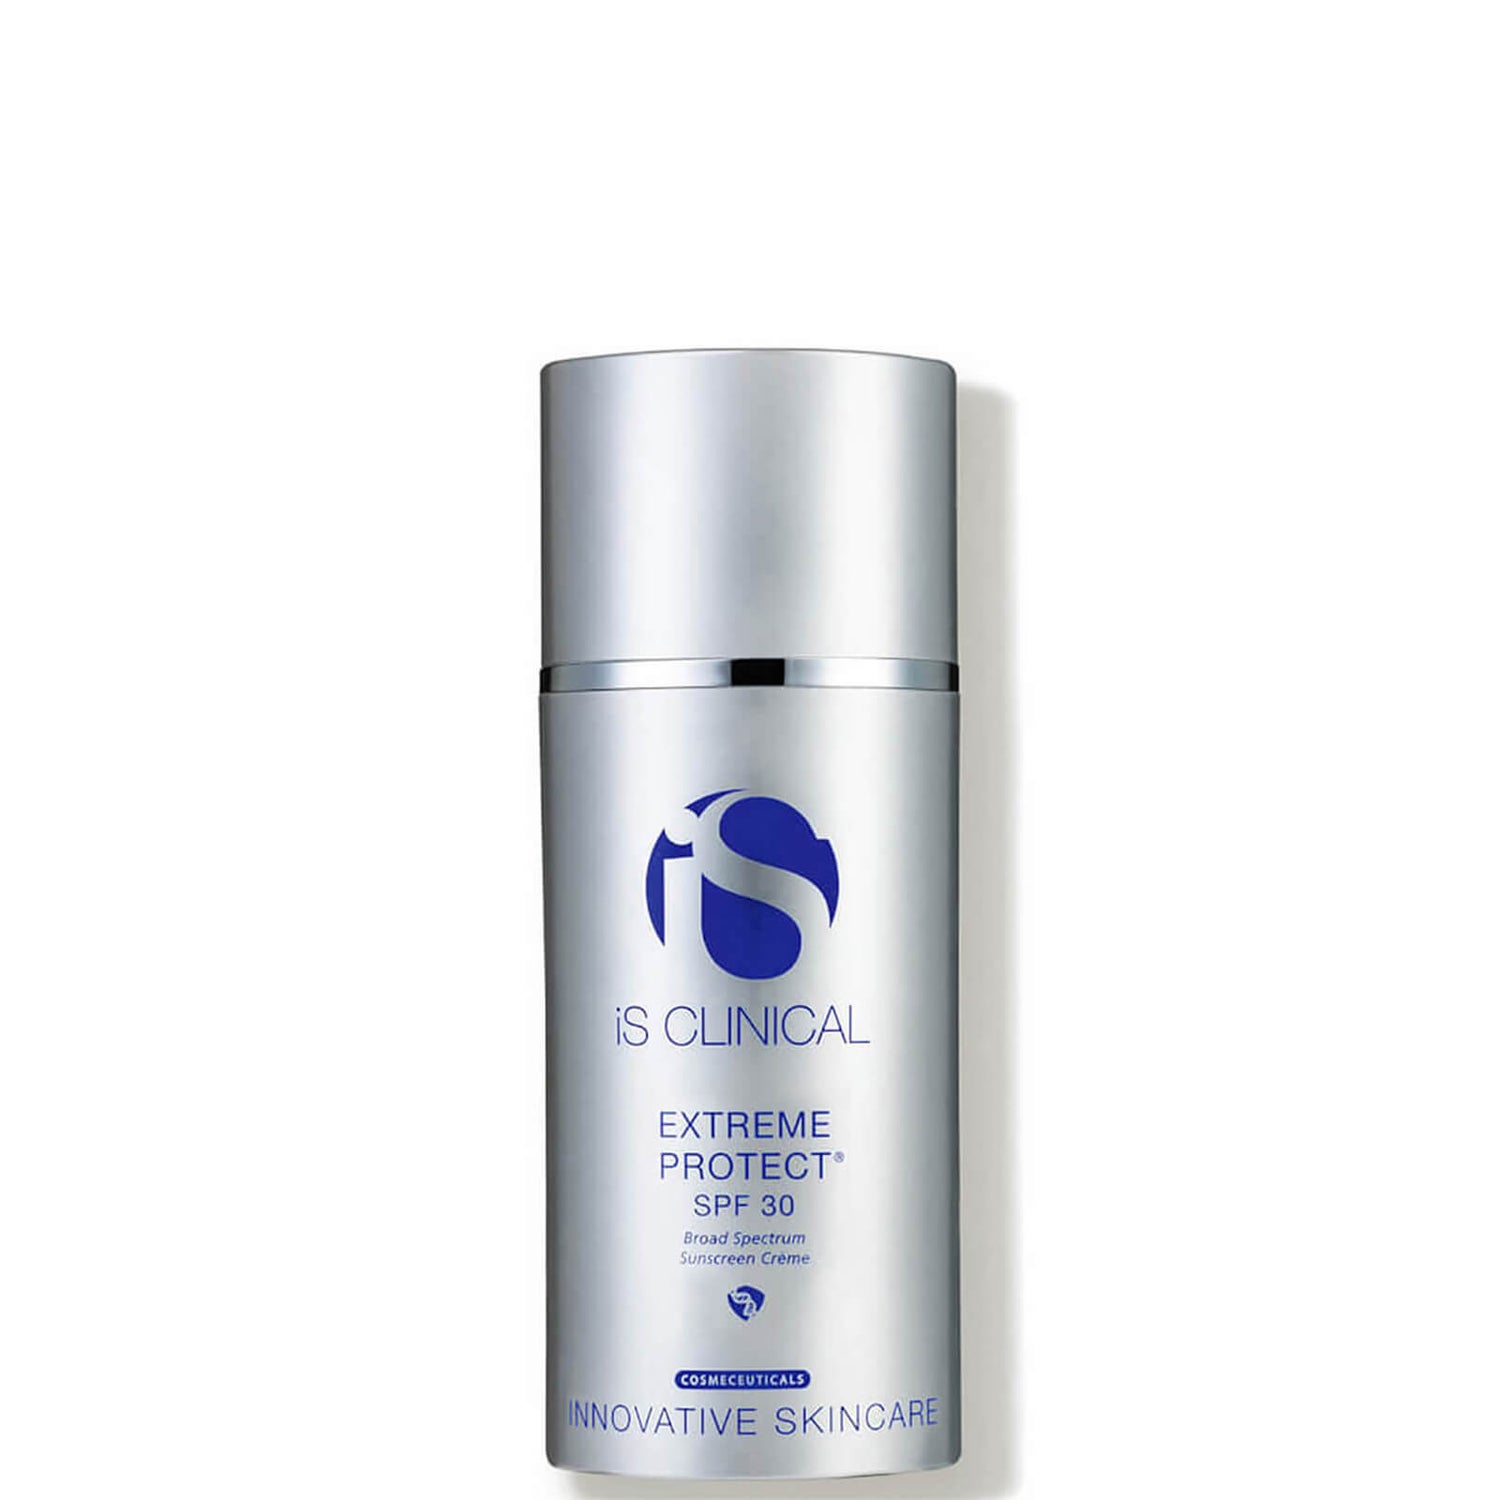 iS Clinical Extreme Protect SPF 30 (3.5 oz.)